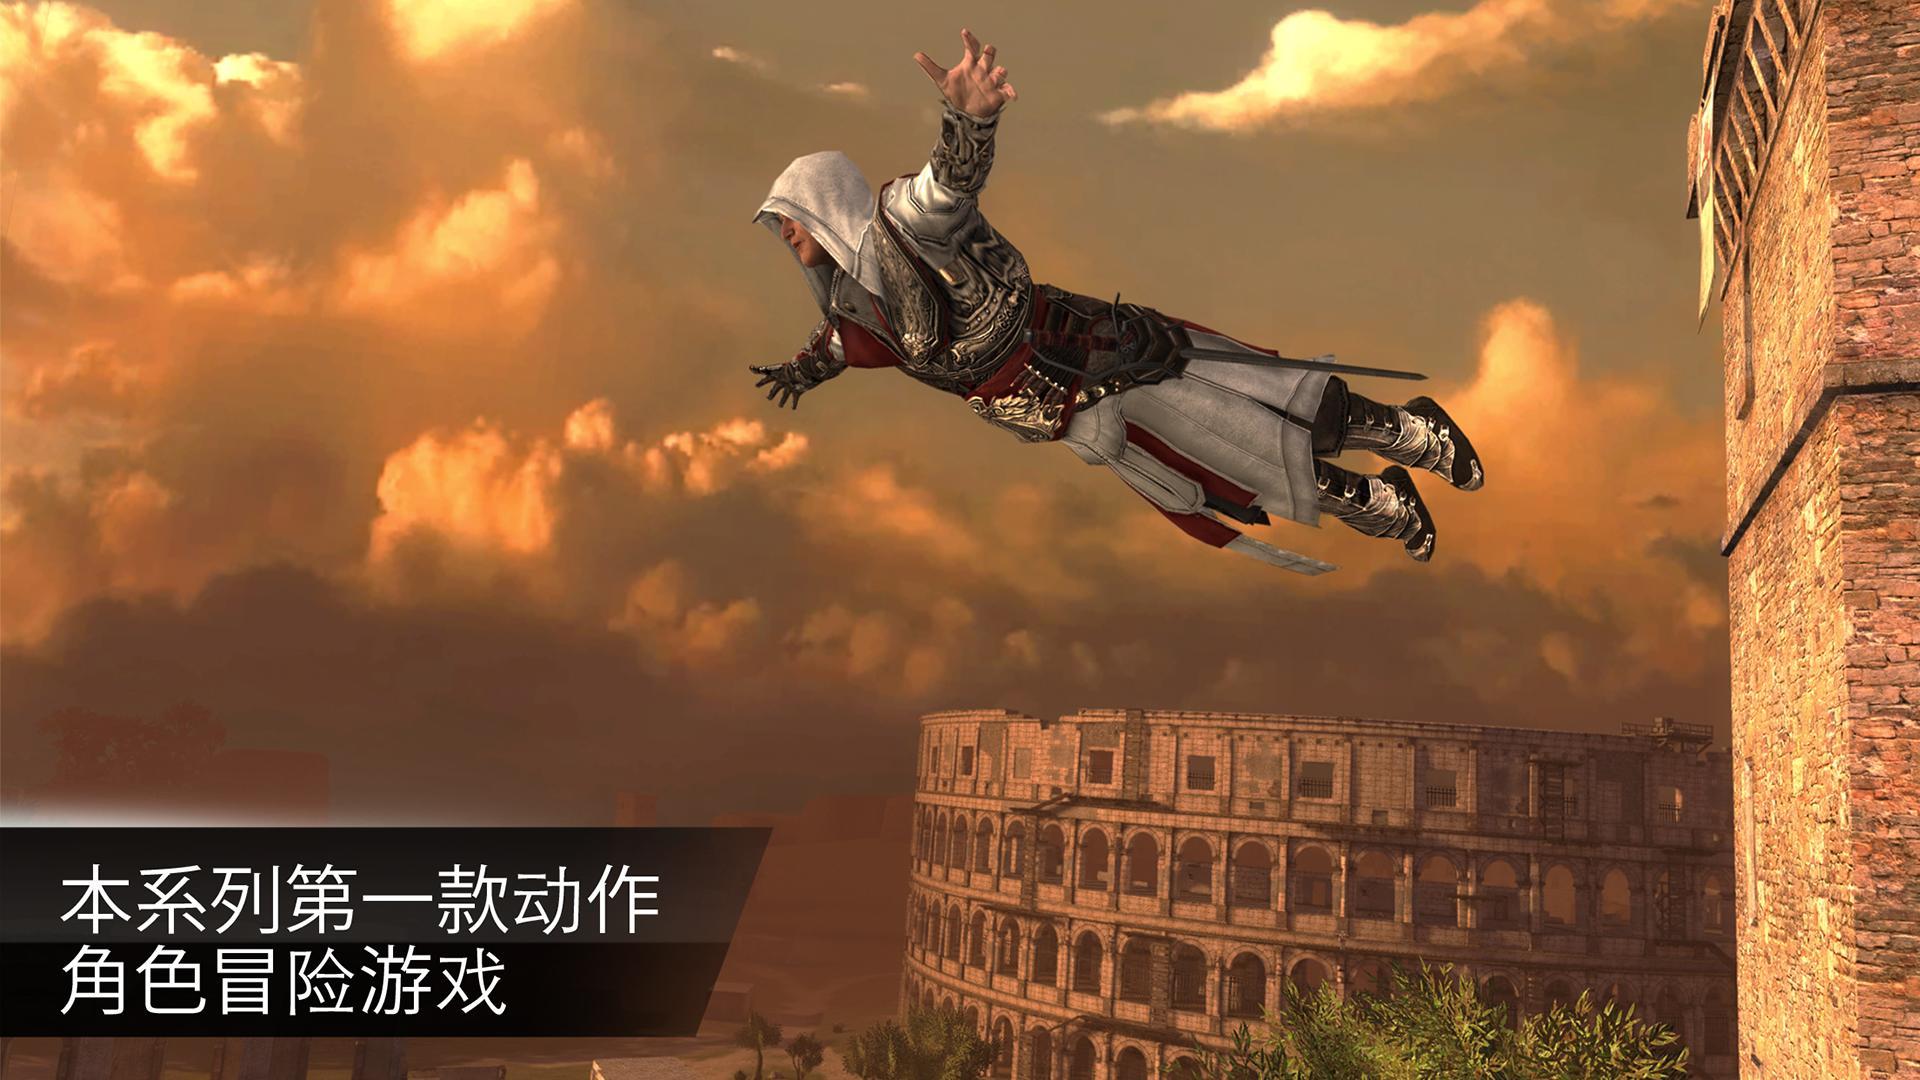 Banner of Assassin's Creed အထောက်အထား 